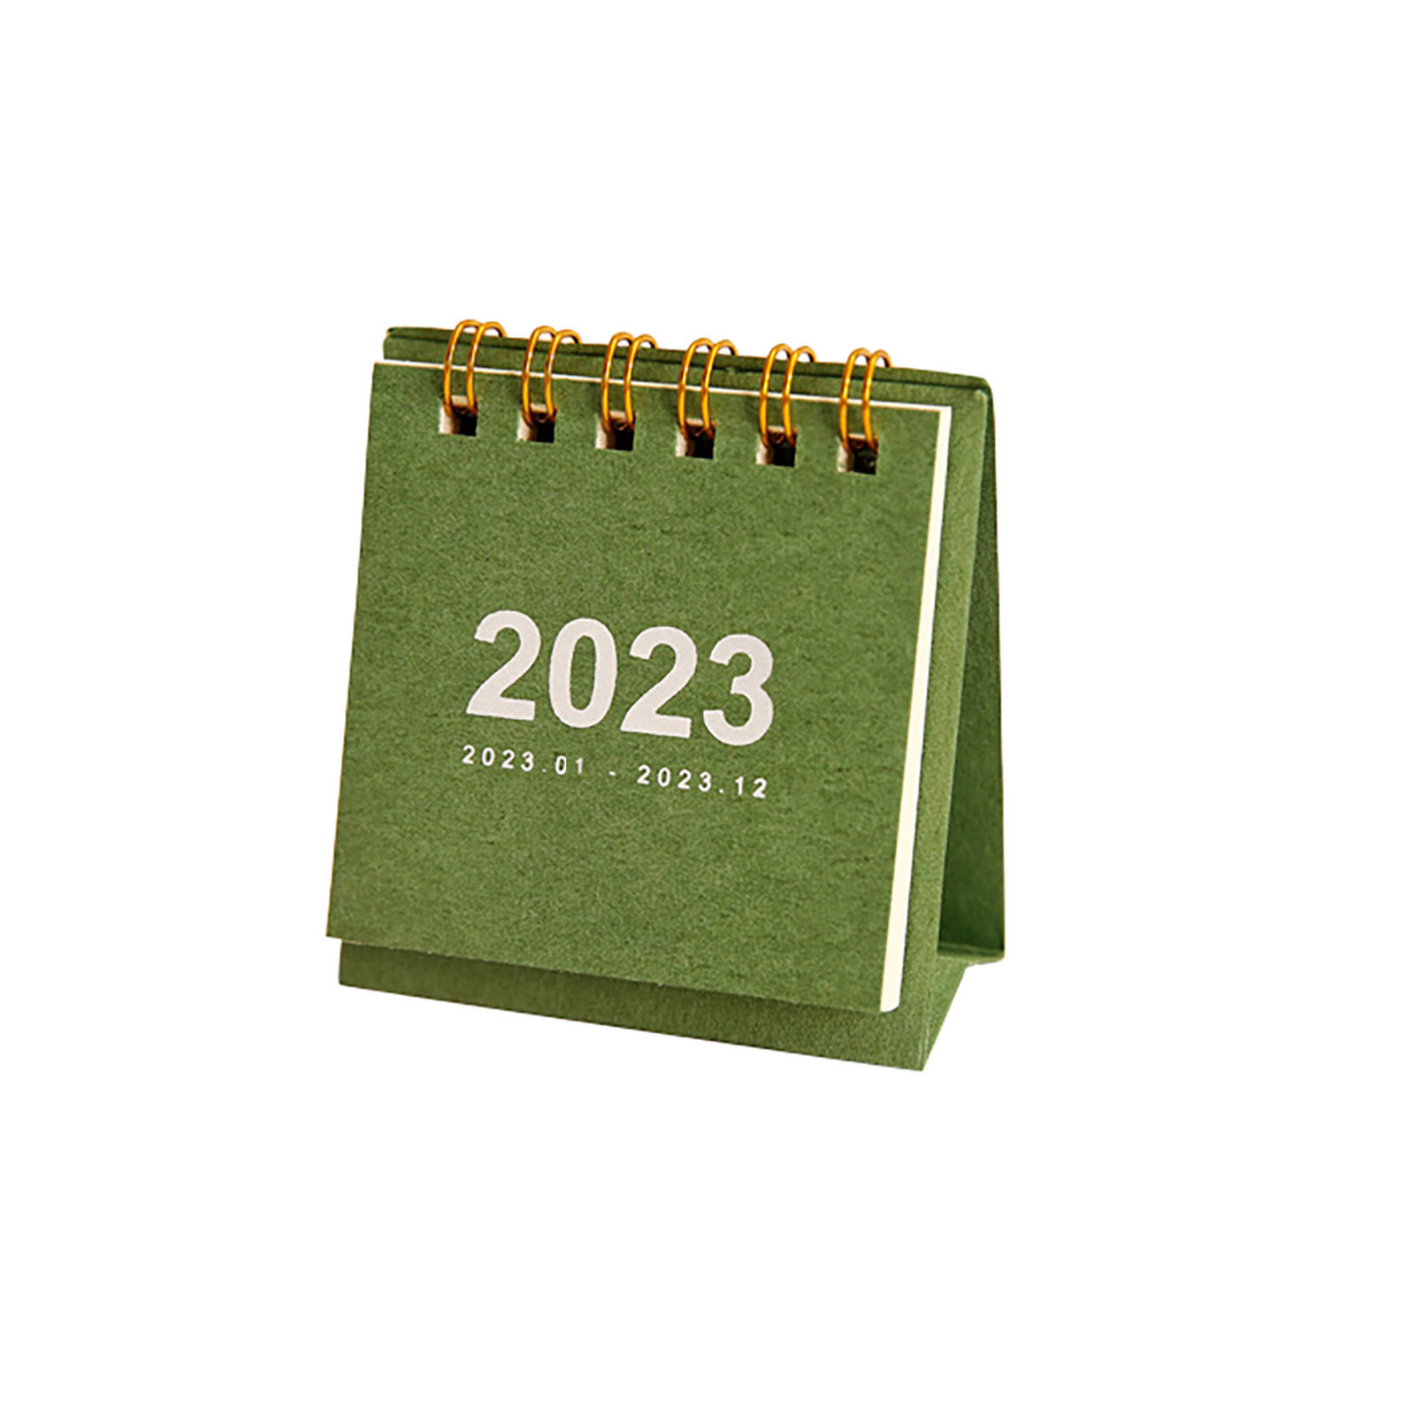 ZZ-096 Refreshing Simple Solid Color 2023 Mini Desktop Paper Calendar Dual Daily Scheduler Table Planner Yearly Agenda Organizer Desk
